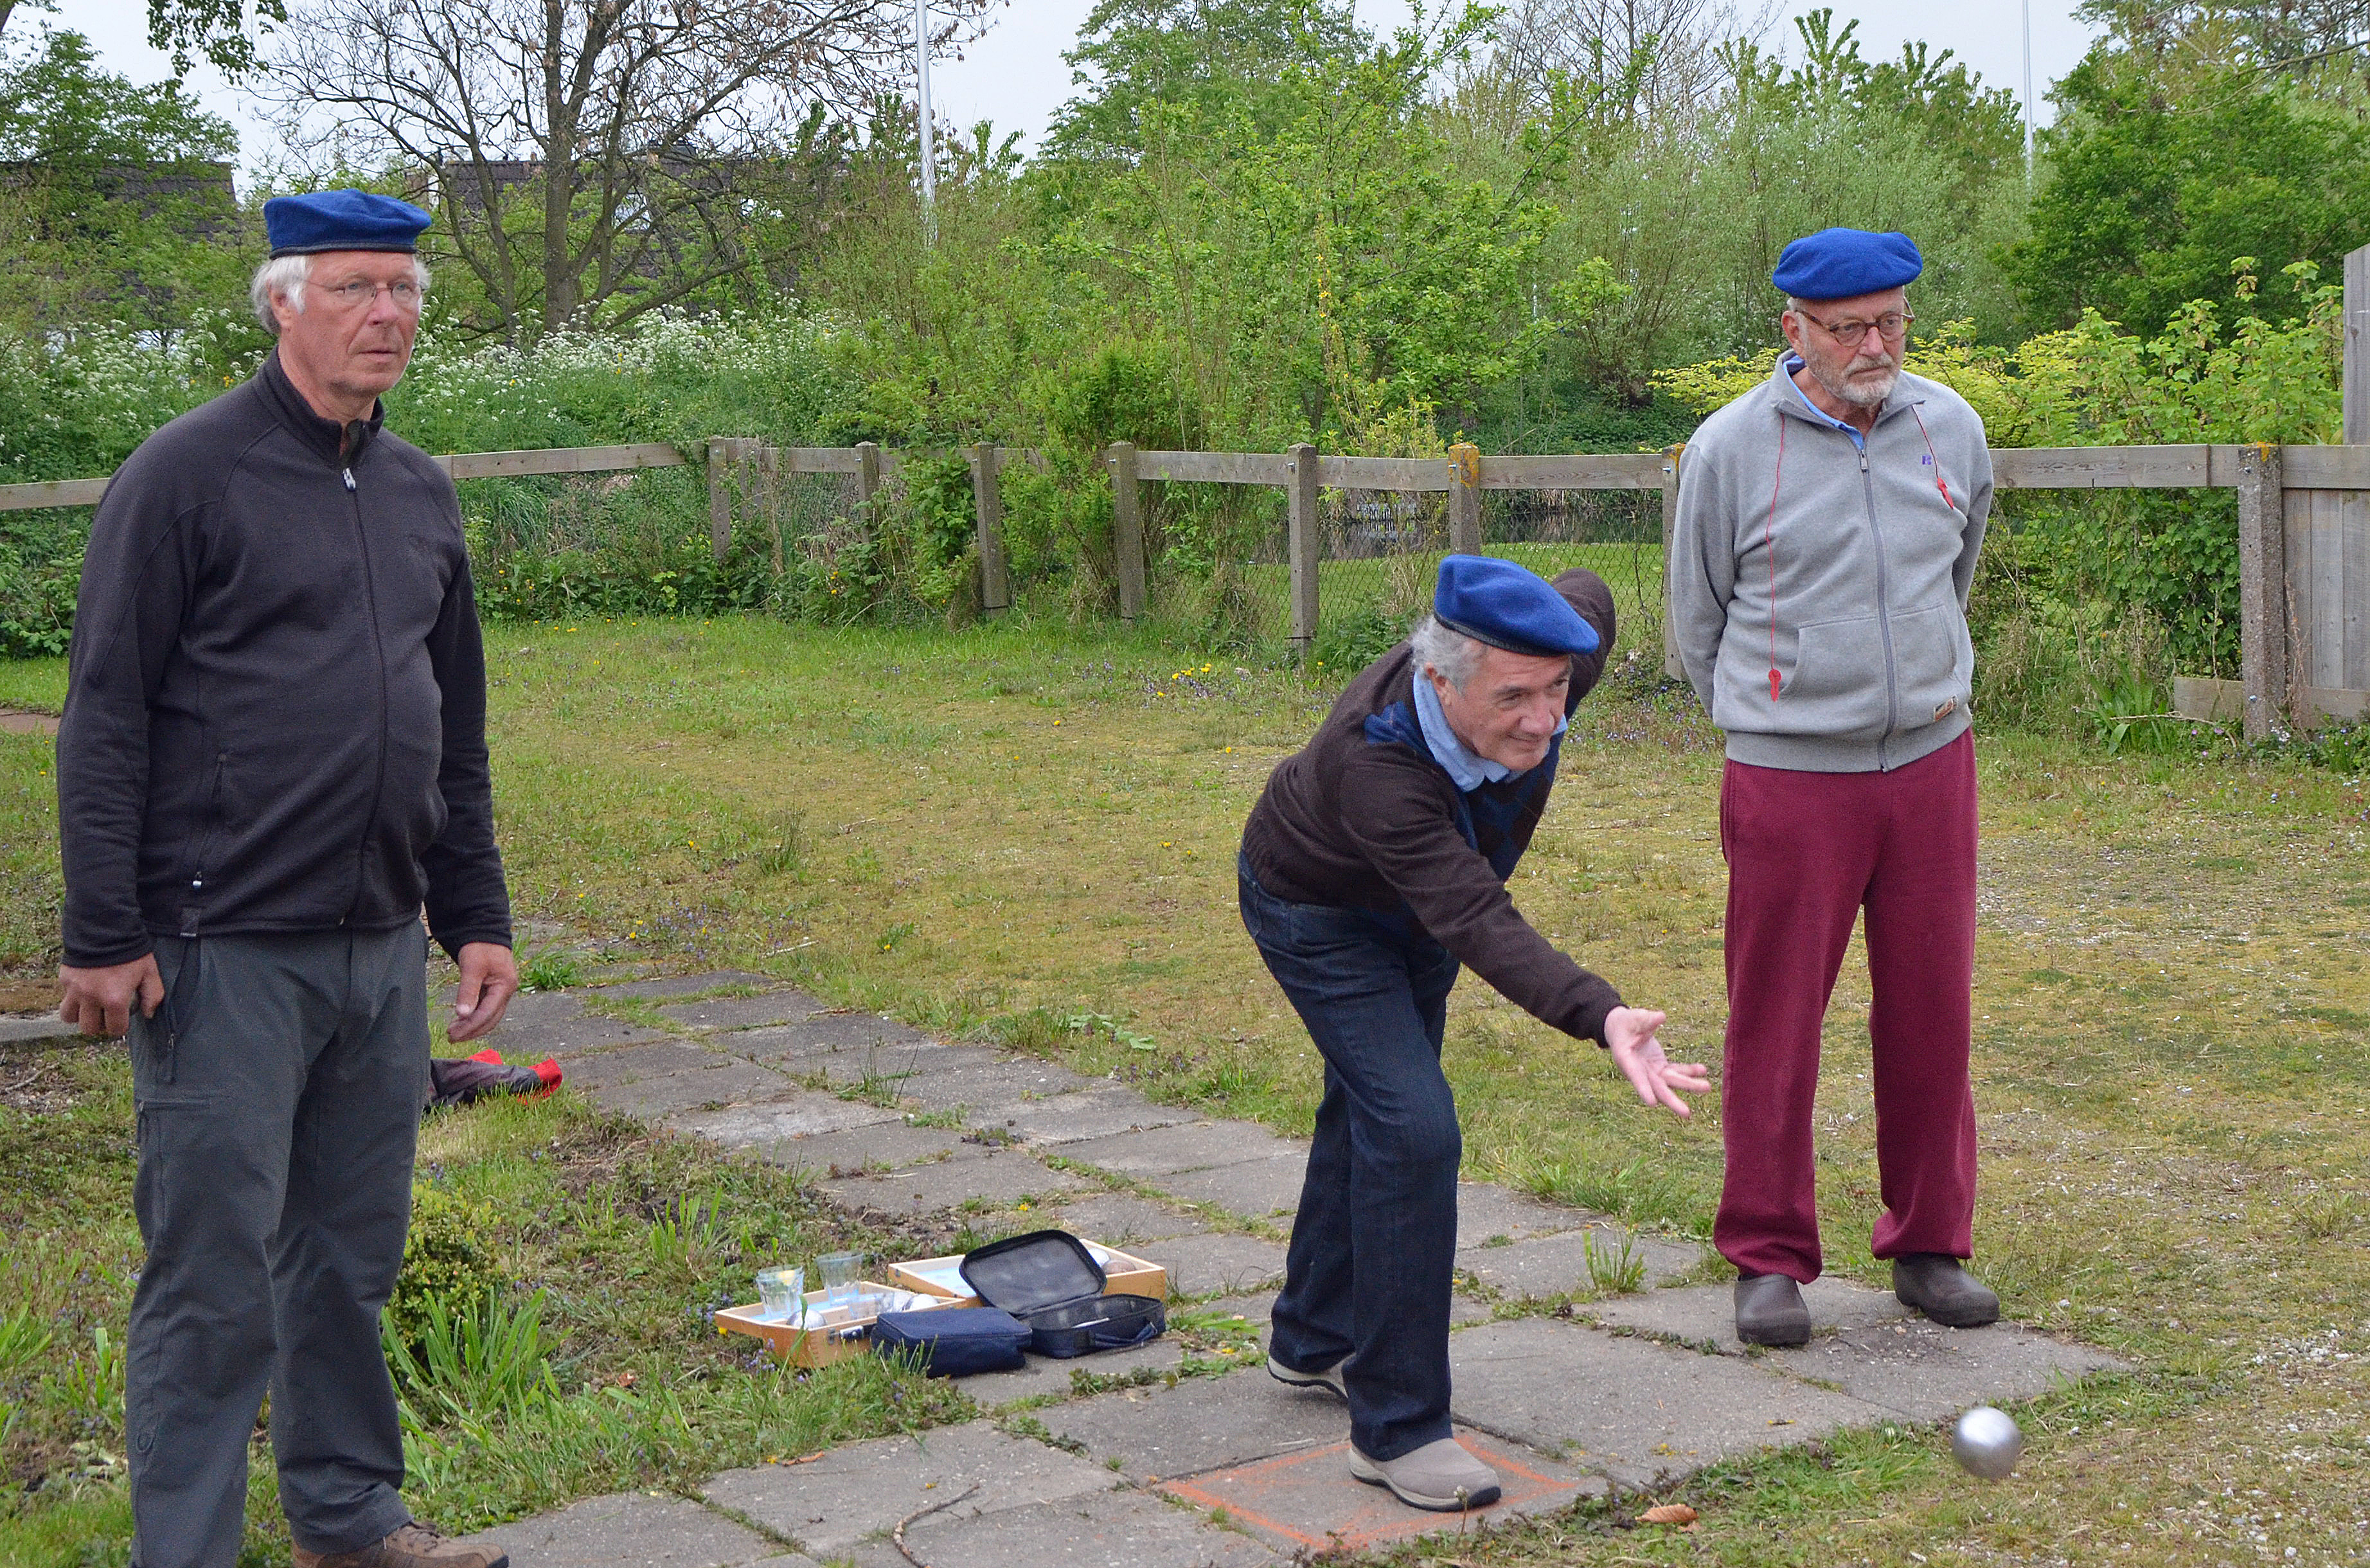 Playing boules in a back lot in Ouder Weeteringj